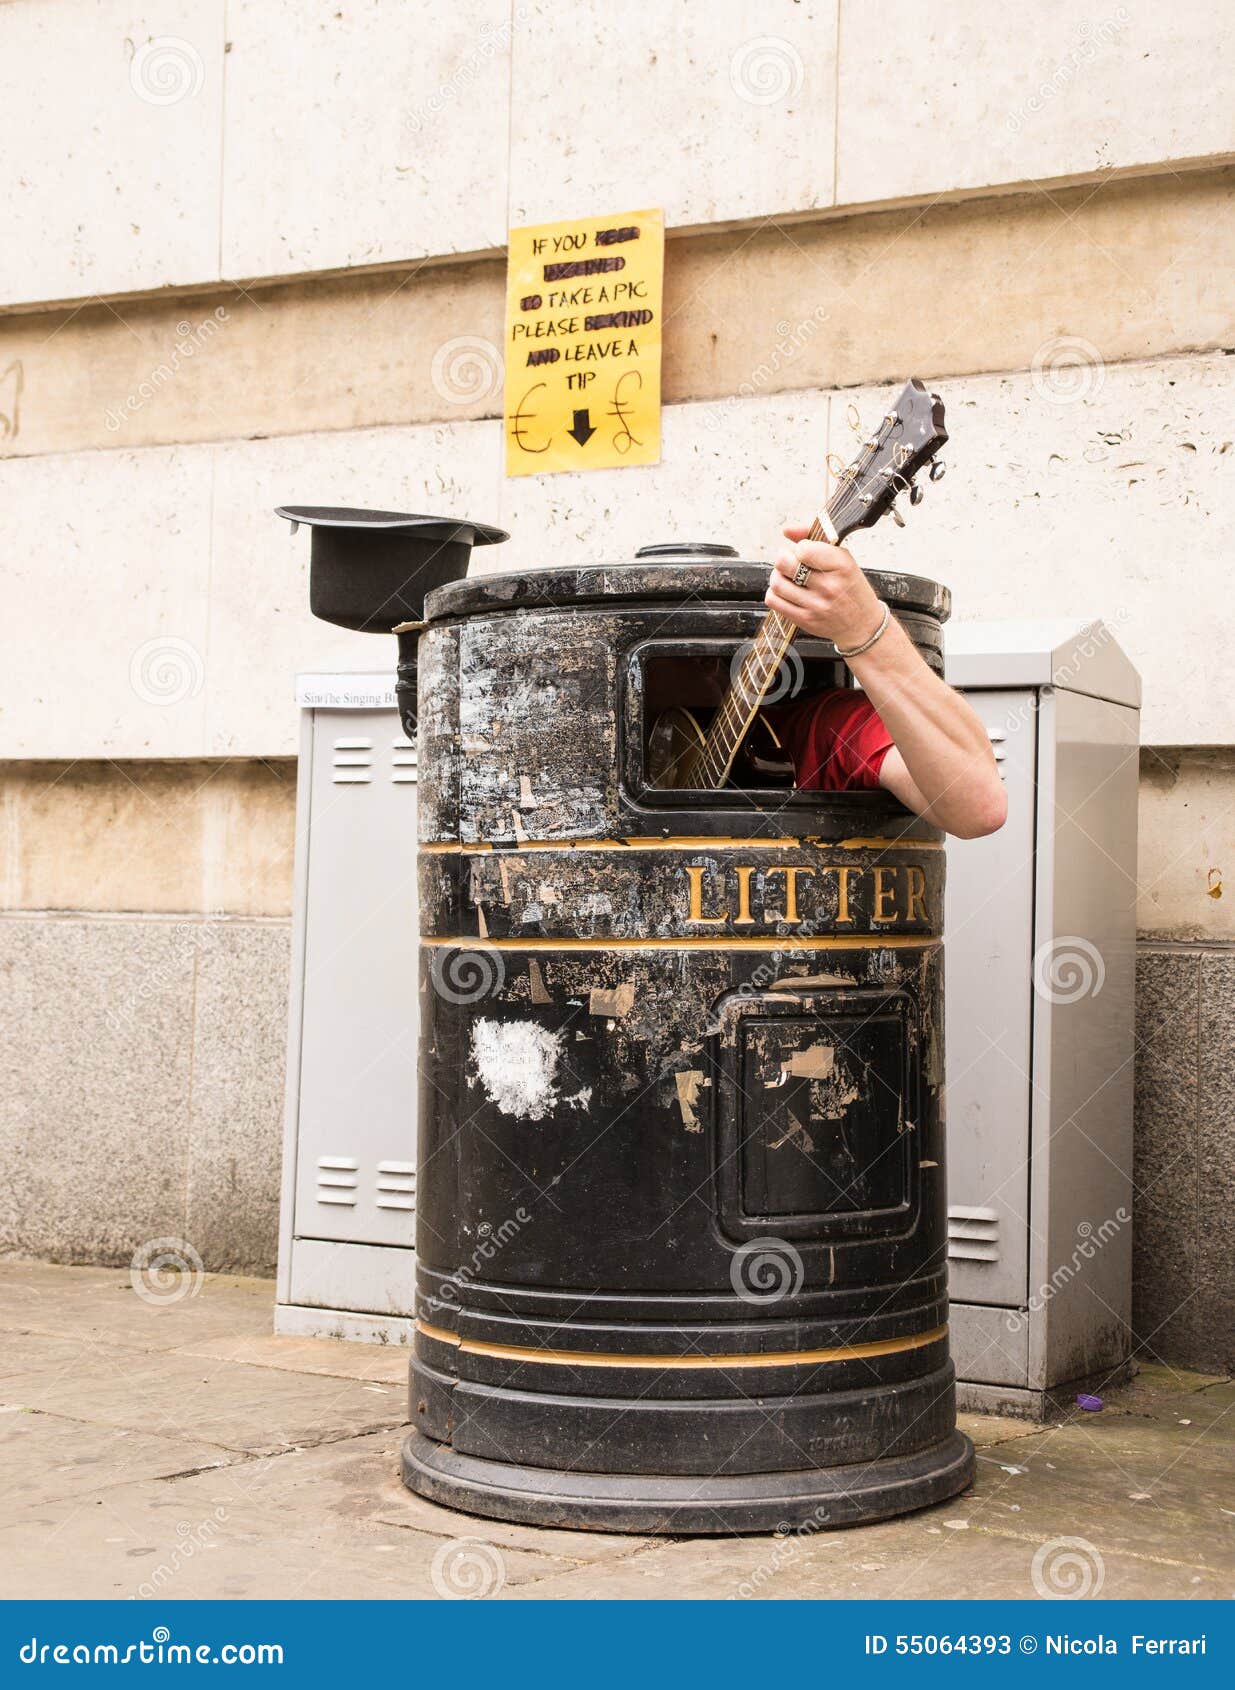 busker singing and playing guitar inside a rubbish bin